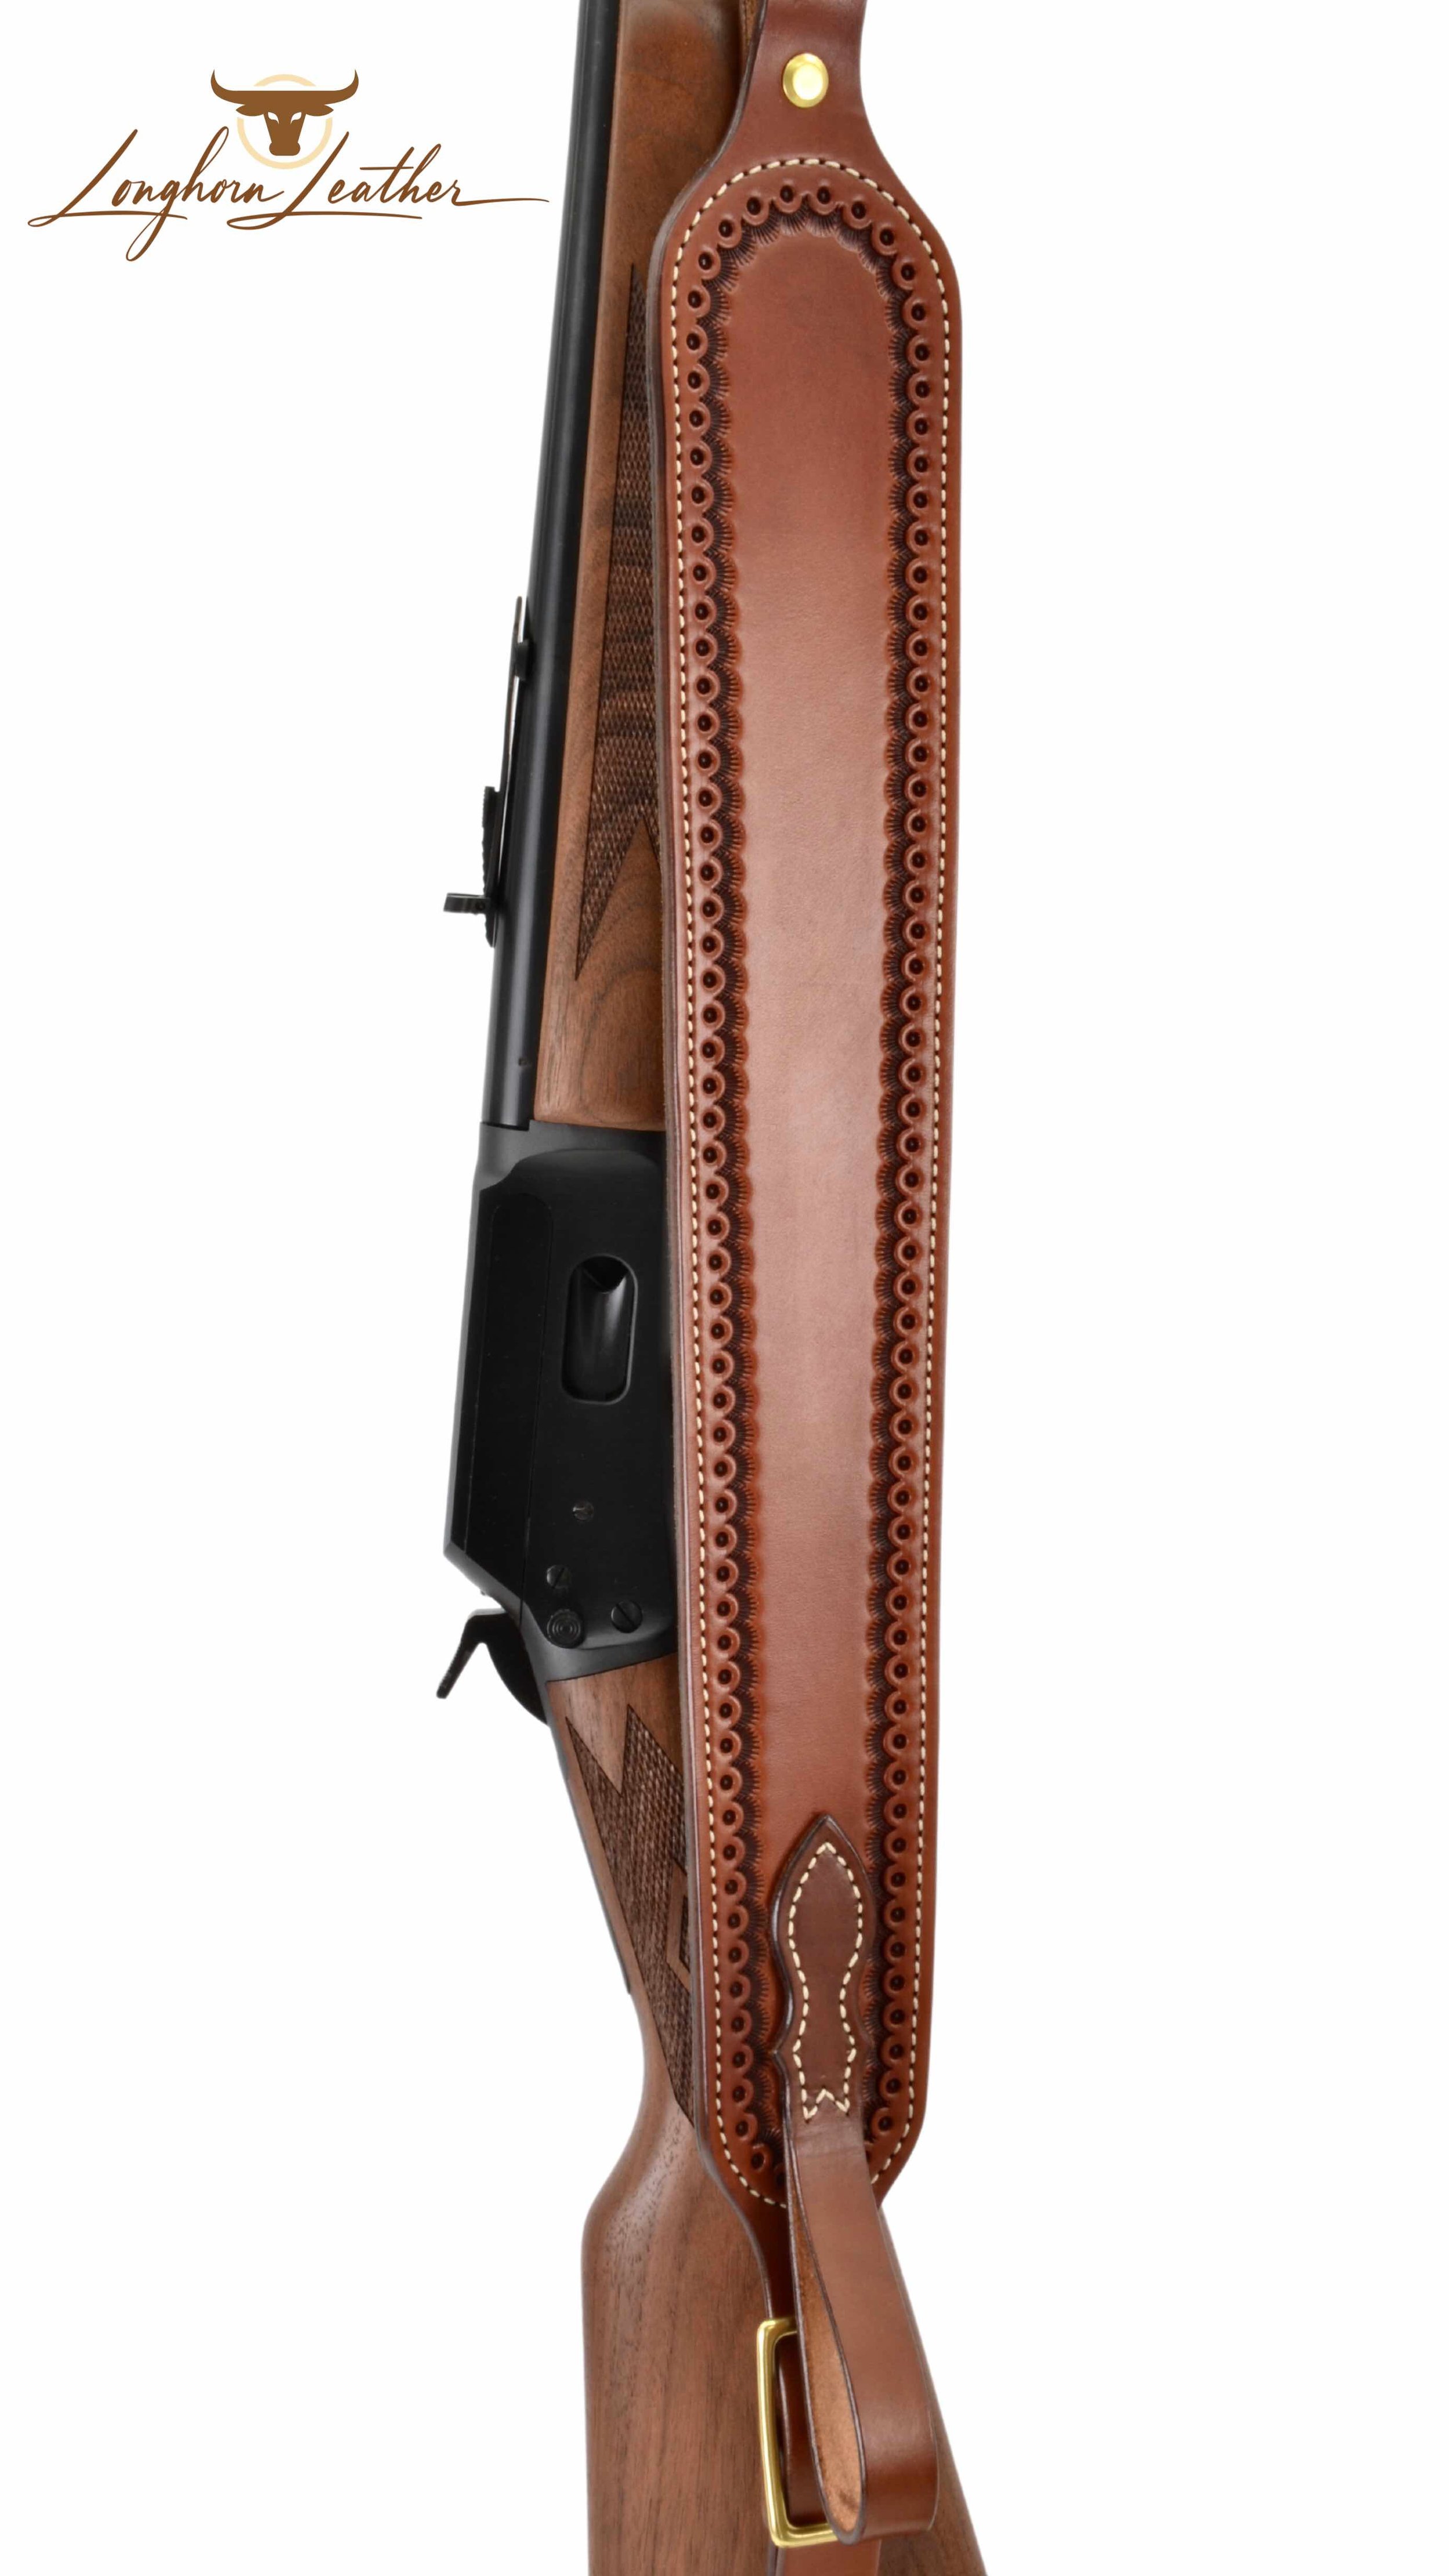 Custom leather rifle sling featuring the Cimarron design. Individually handcrafted at Longhorn Leather AZ